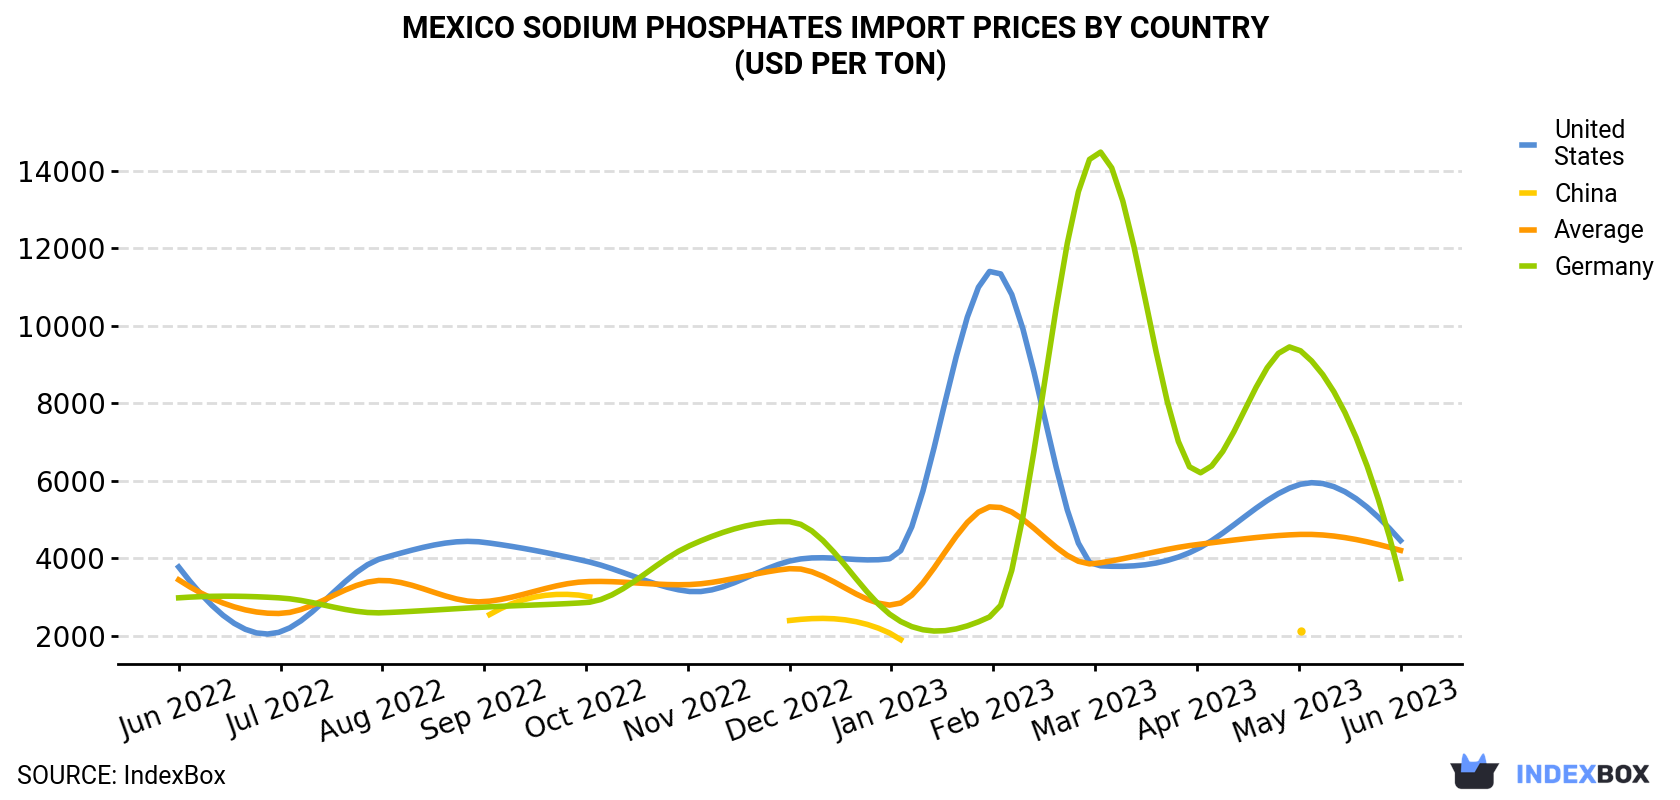 Mexico Sodium Phosphates Import Prices By Country (USD Per Ton)